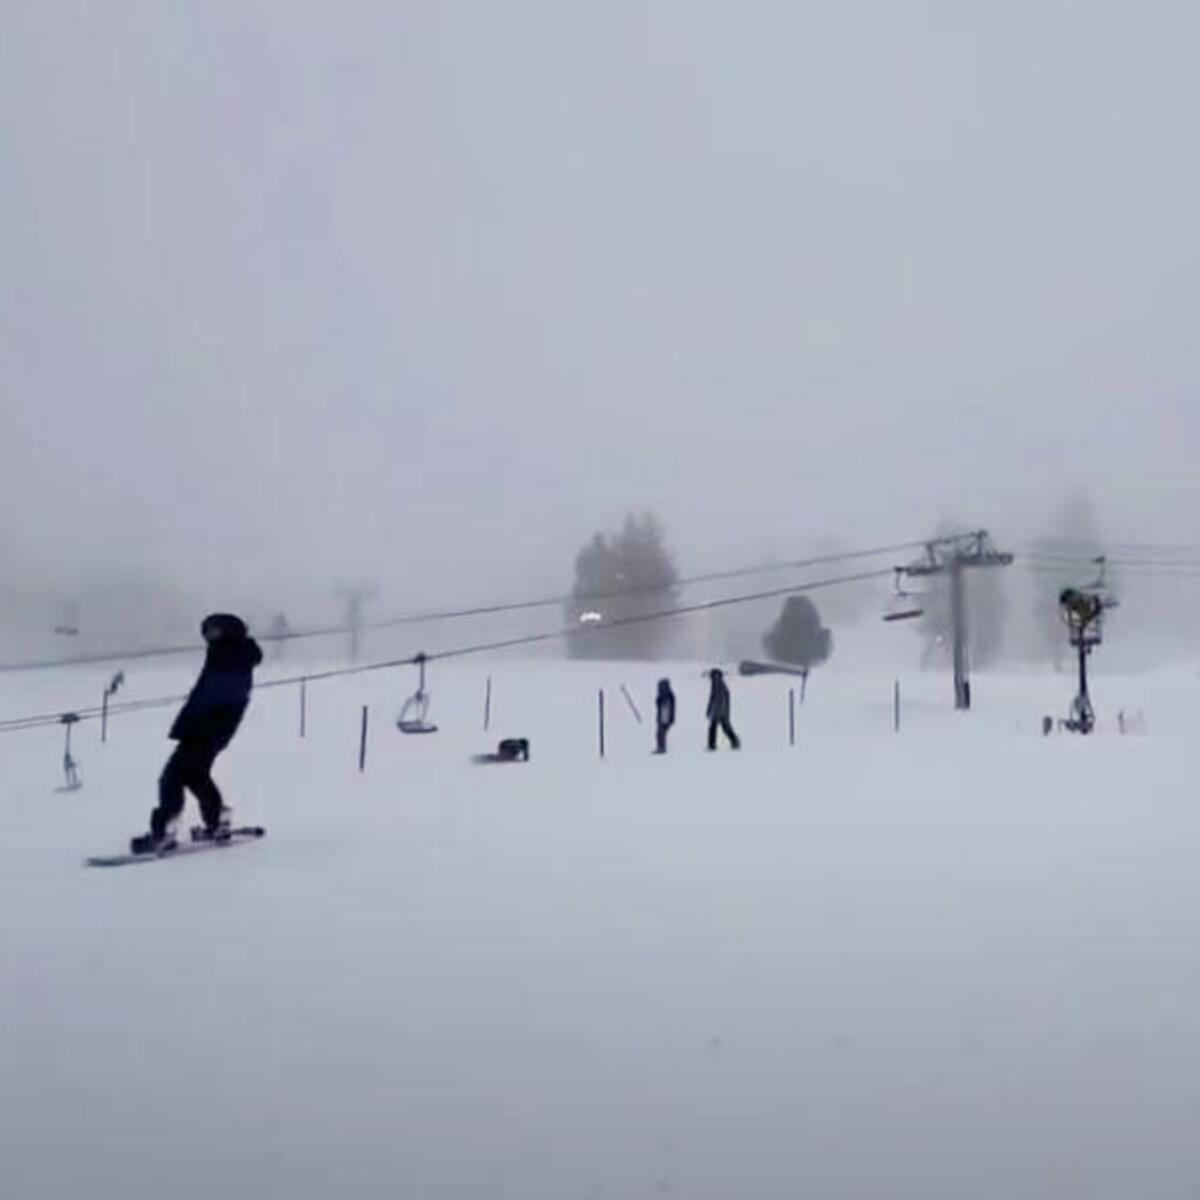 A person snowboards; two others stand beneath a ski lift.